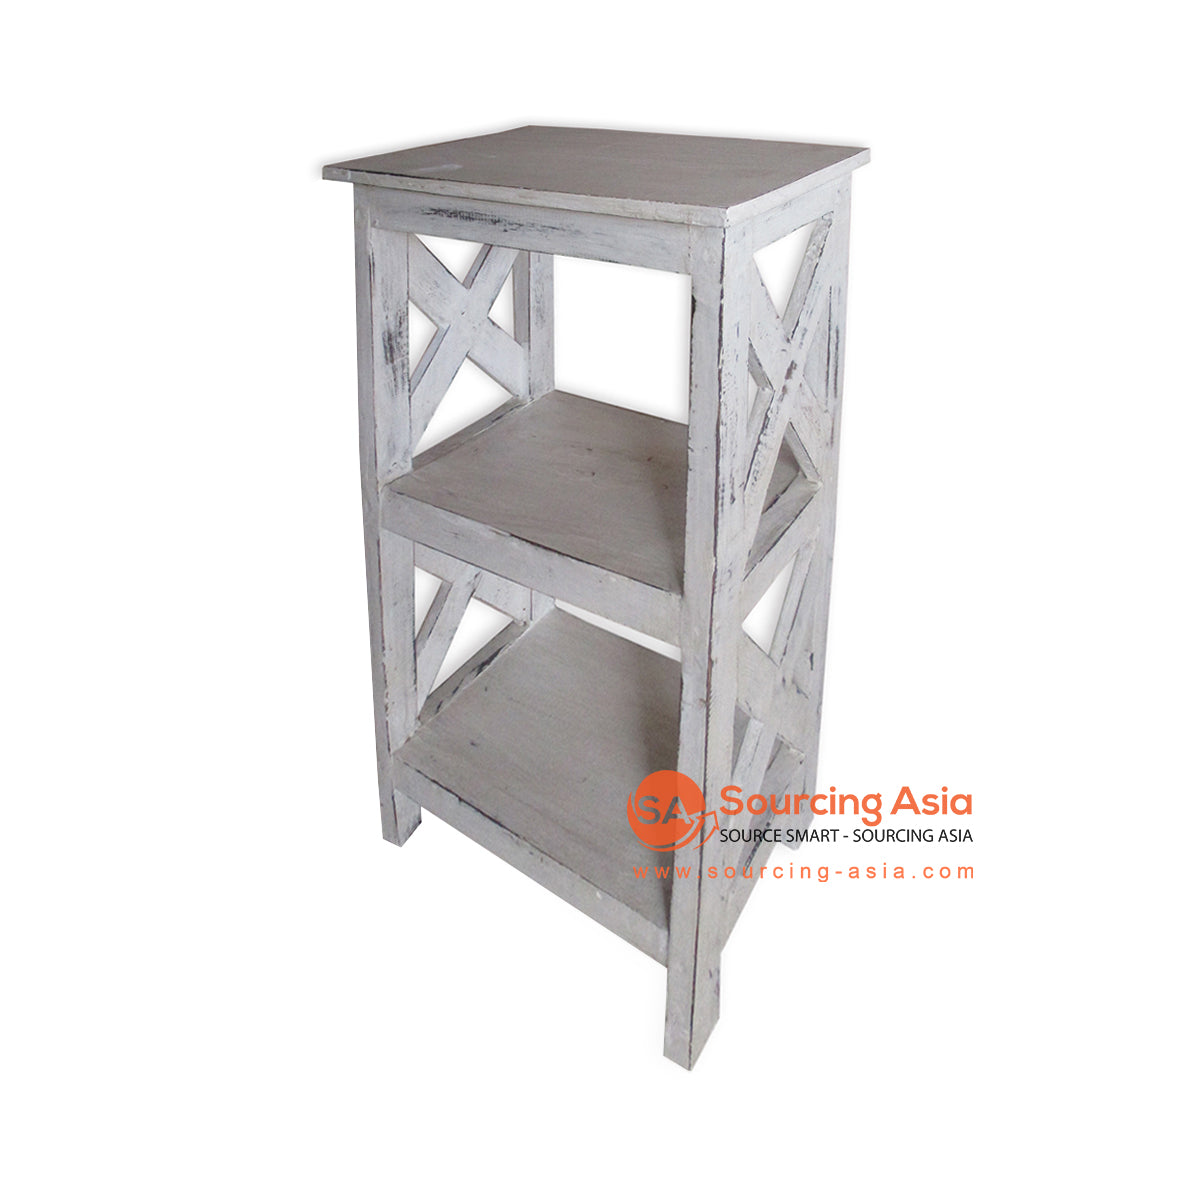 THE147WW WHITE WASH WOODEN BOOK RACK WITH TWO SHELVES